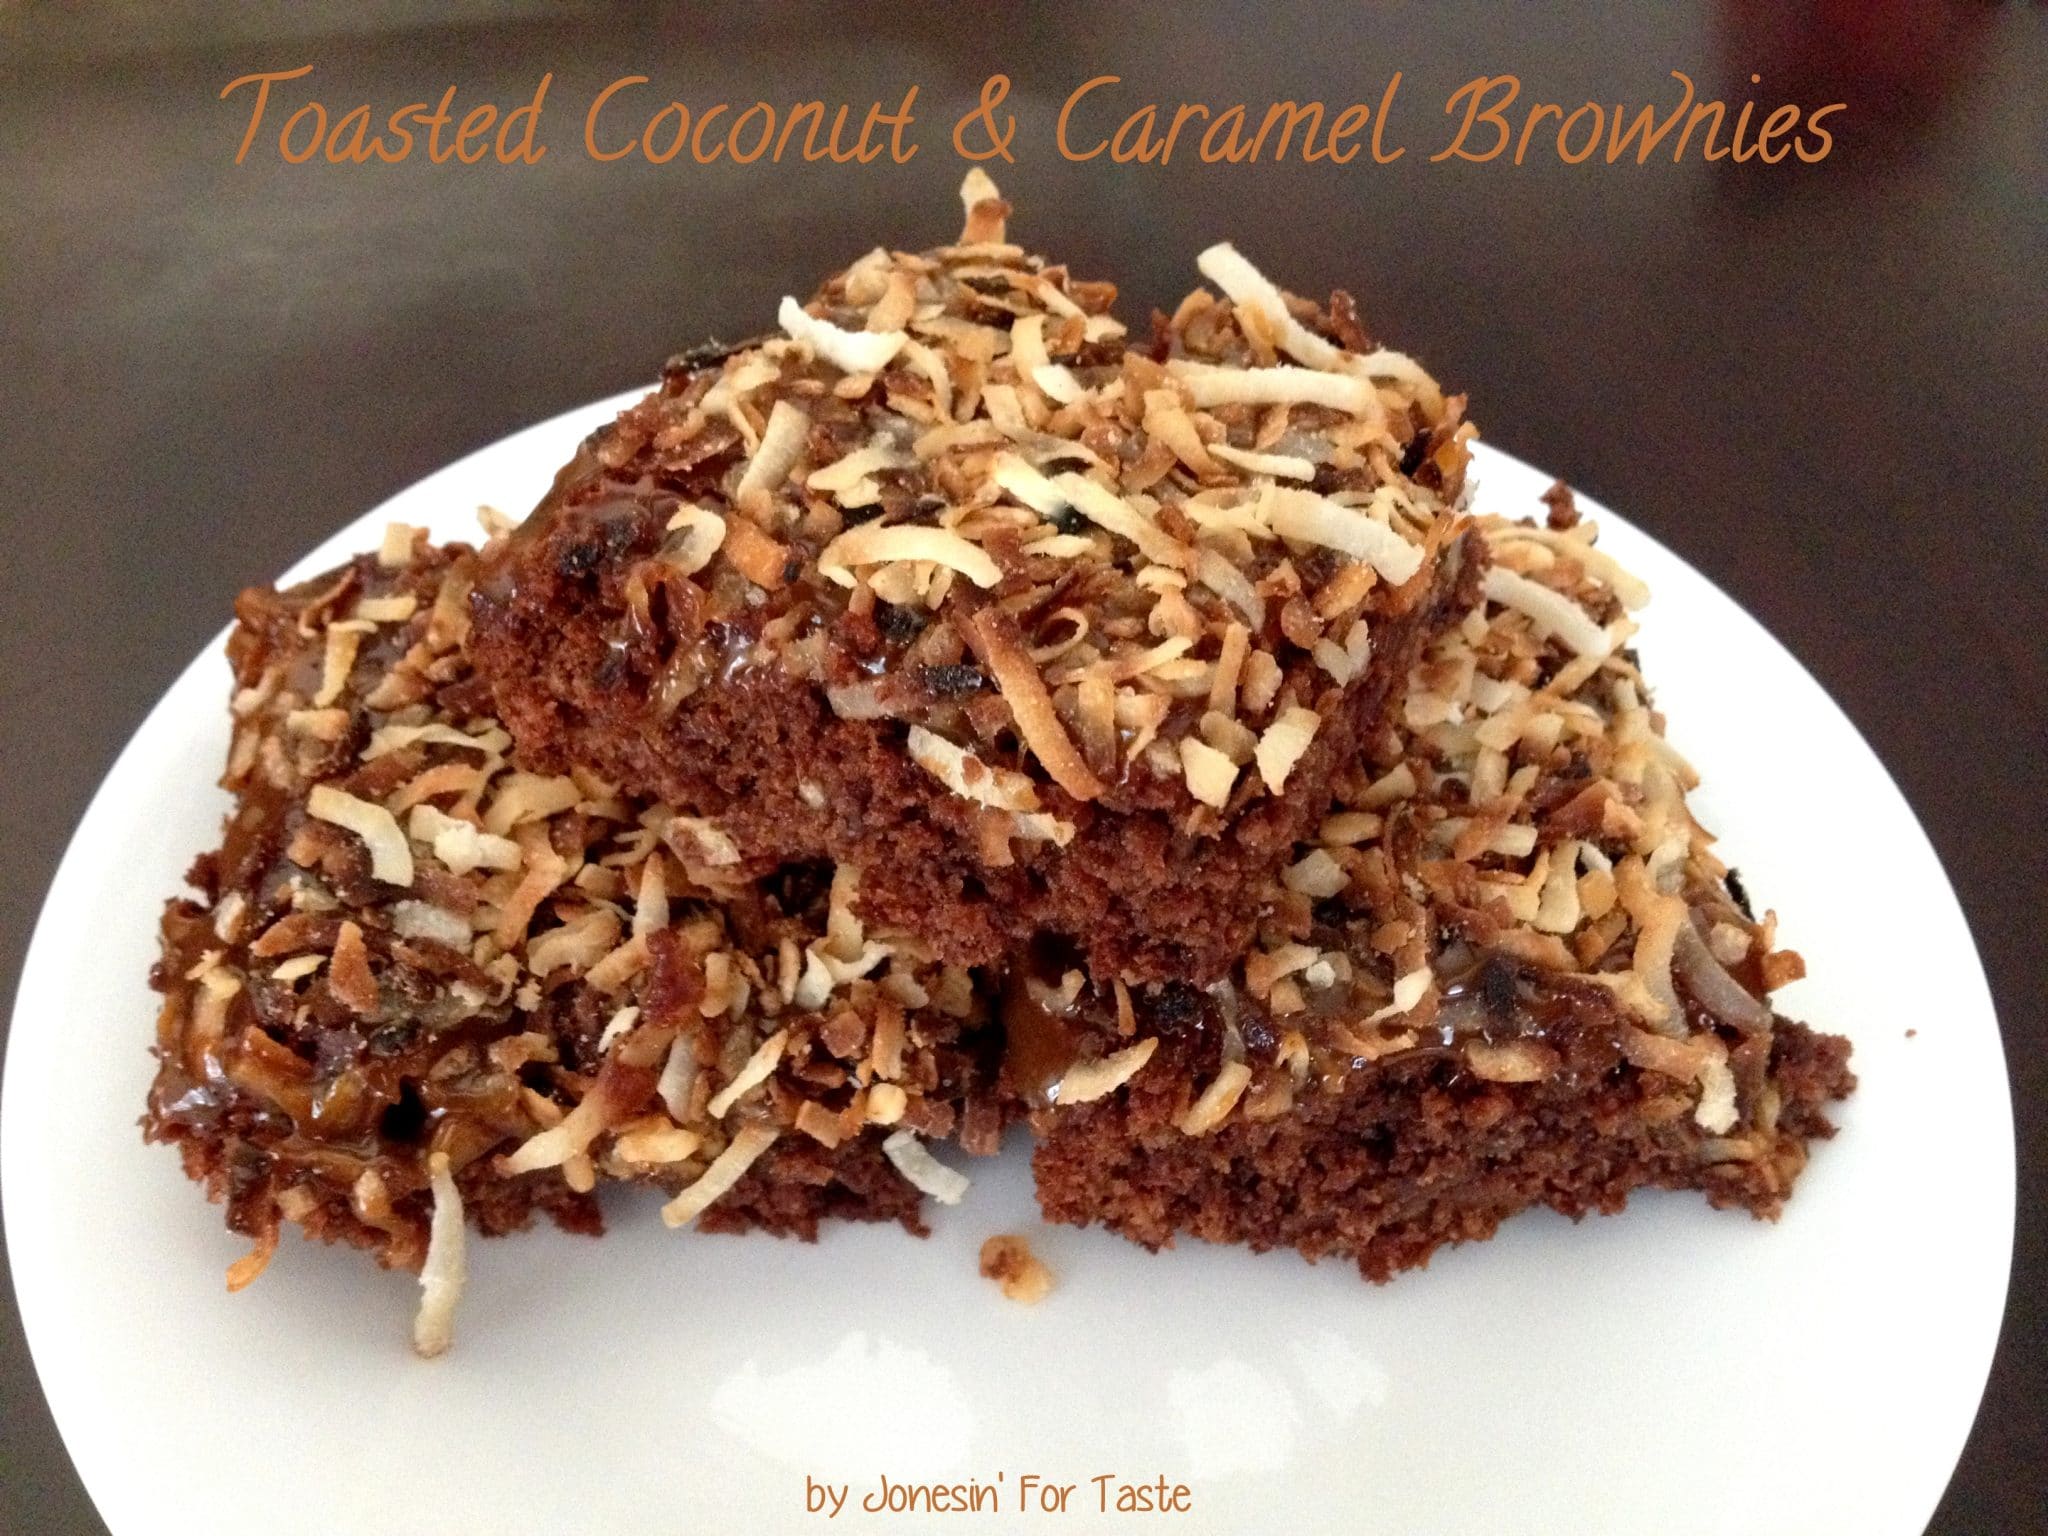 Toasted Coconut and Caramel Brownies